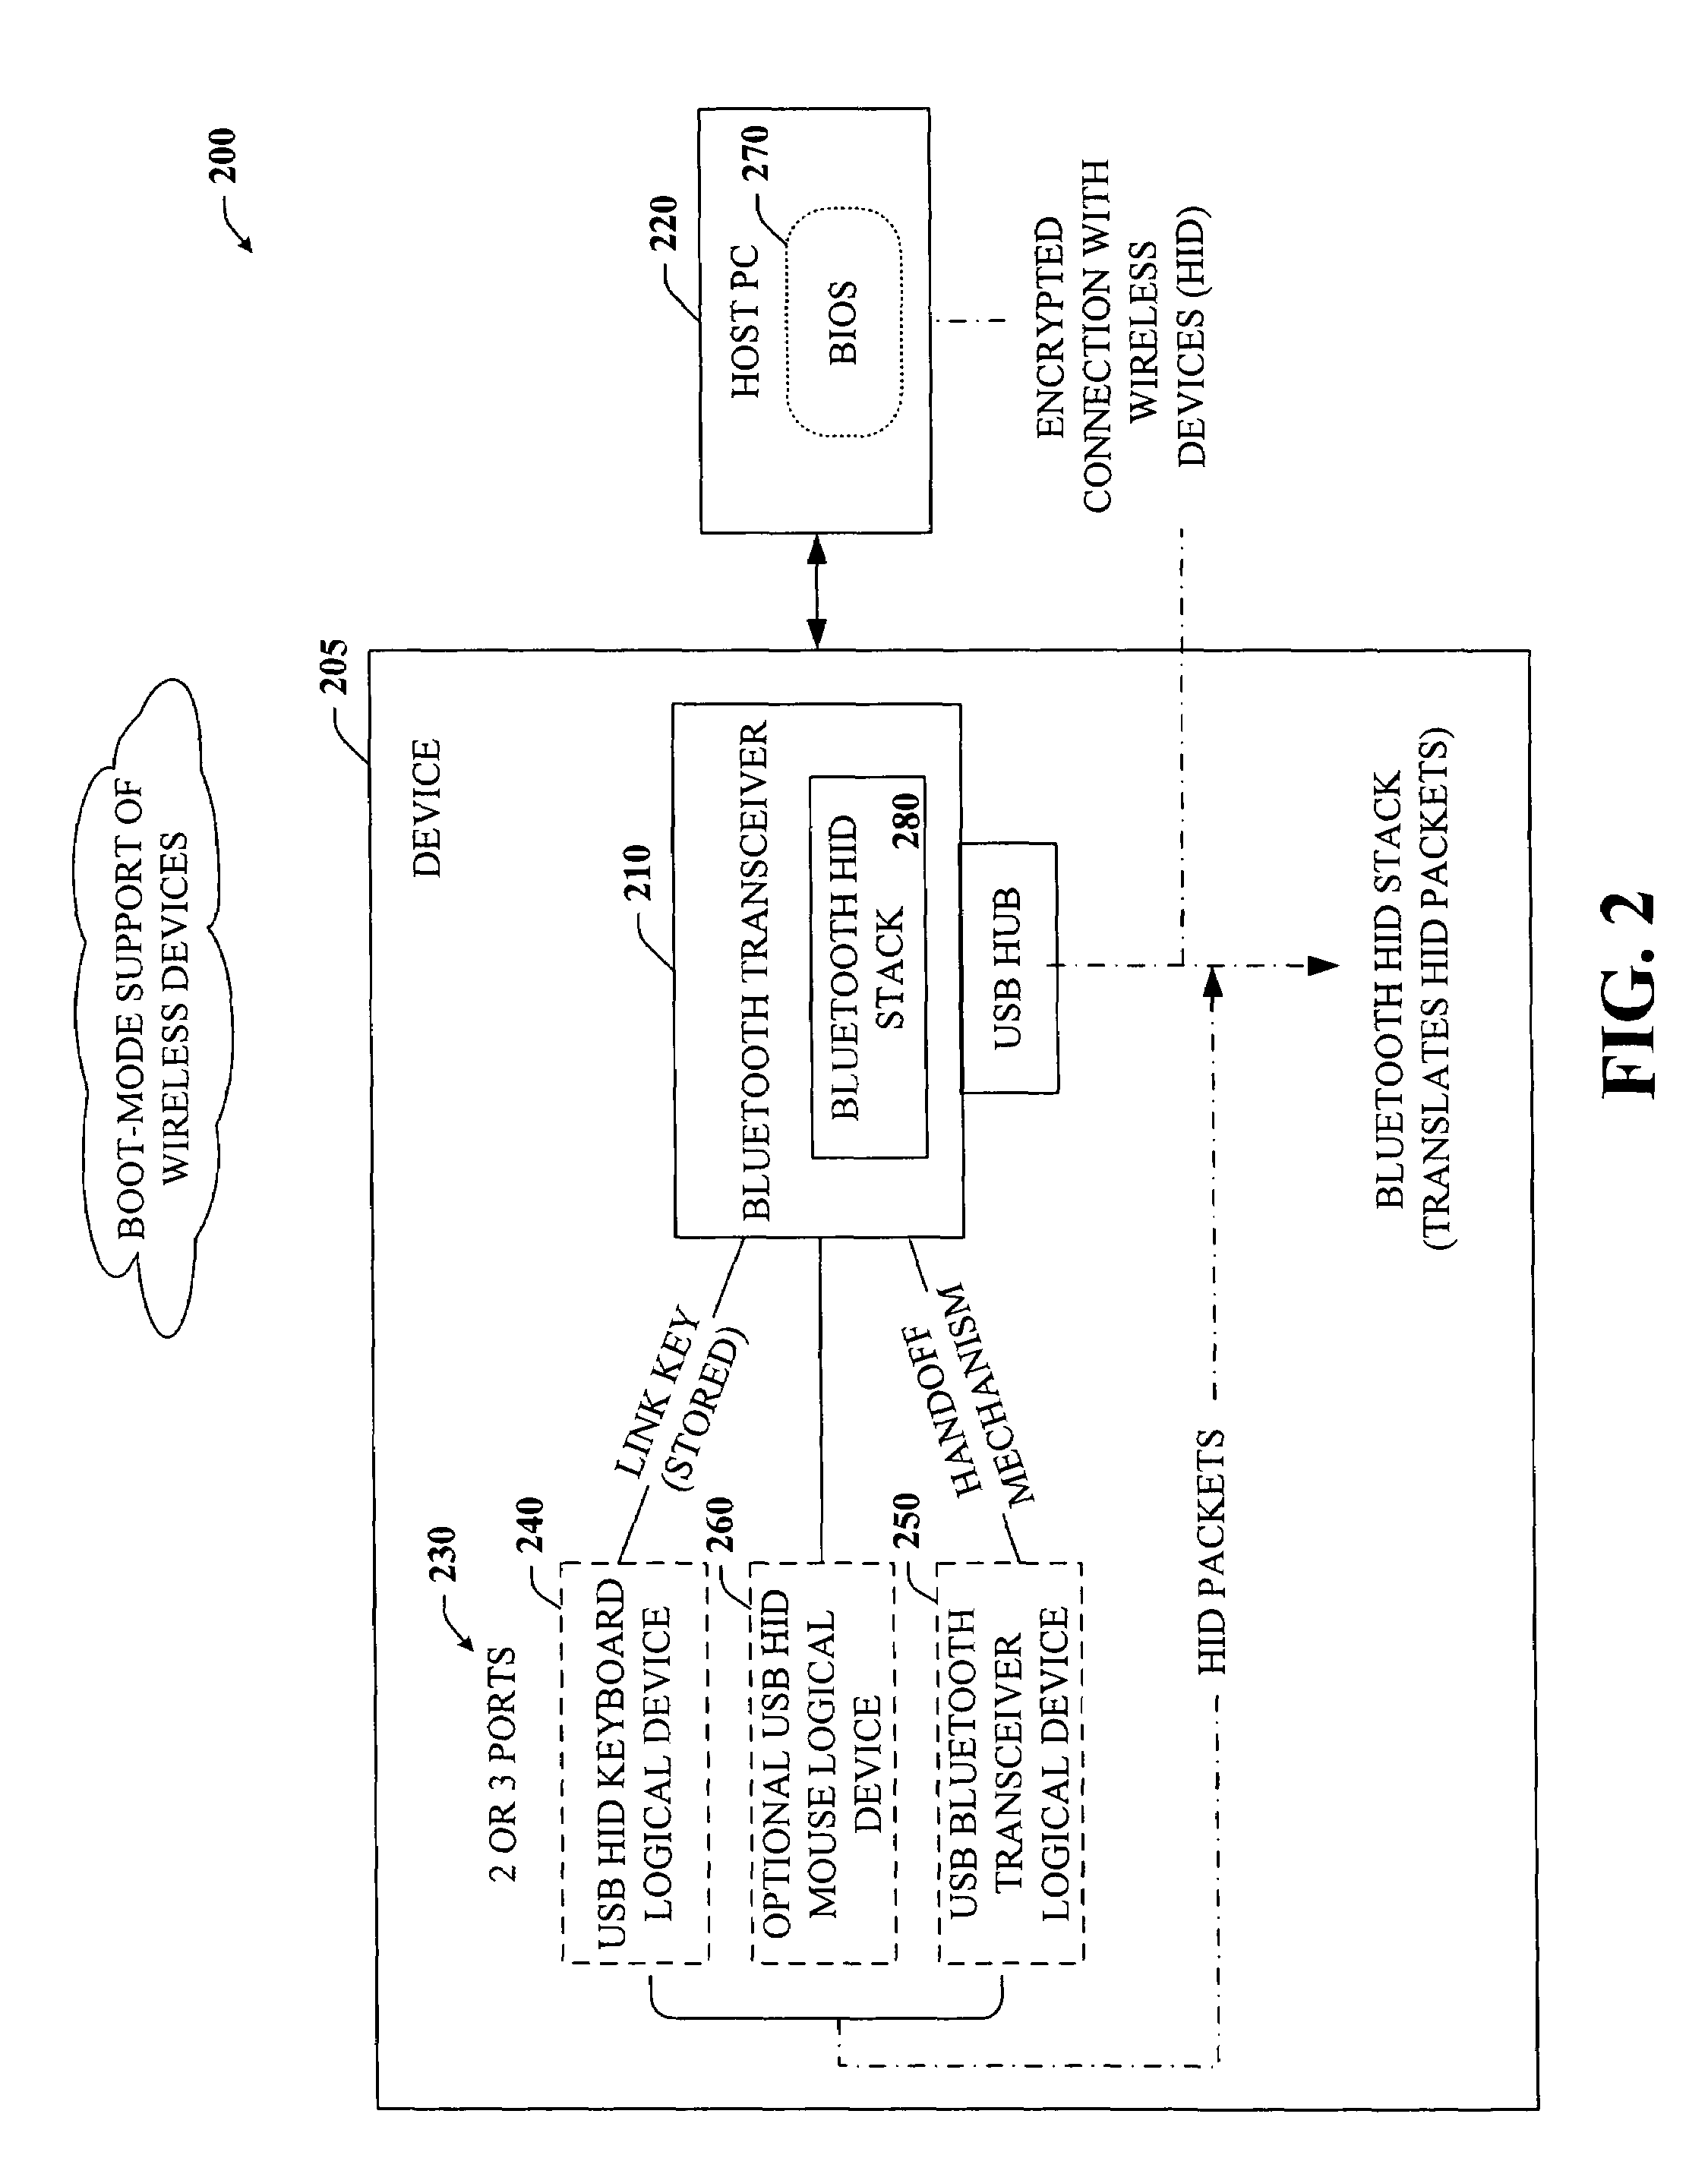 Wireless device support for electronic devices